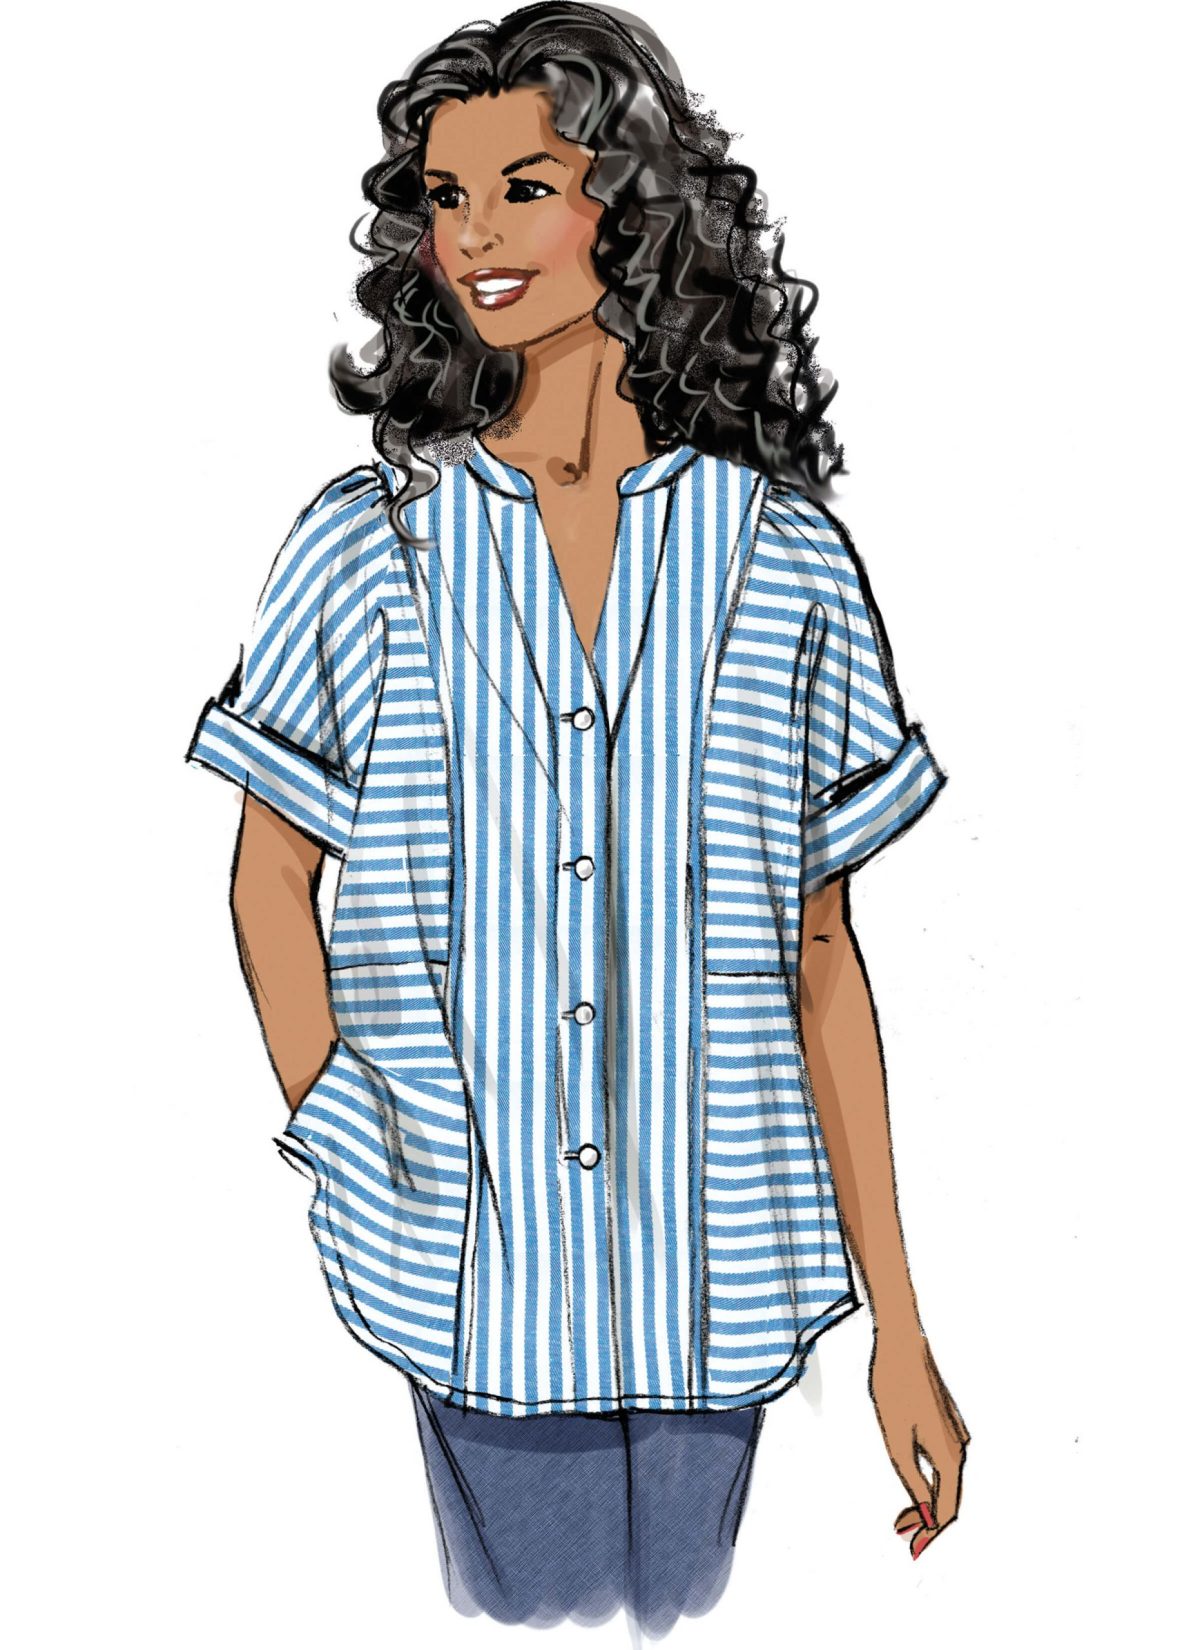 Butterick Sewing Pattern B6943 Misses' Top with Short or Long Sleeves